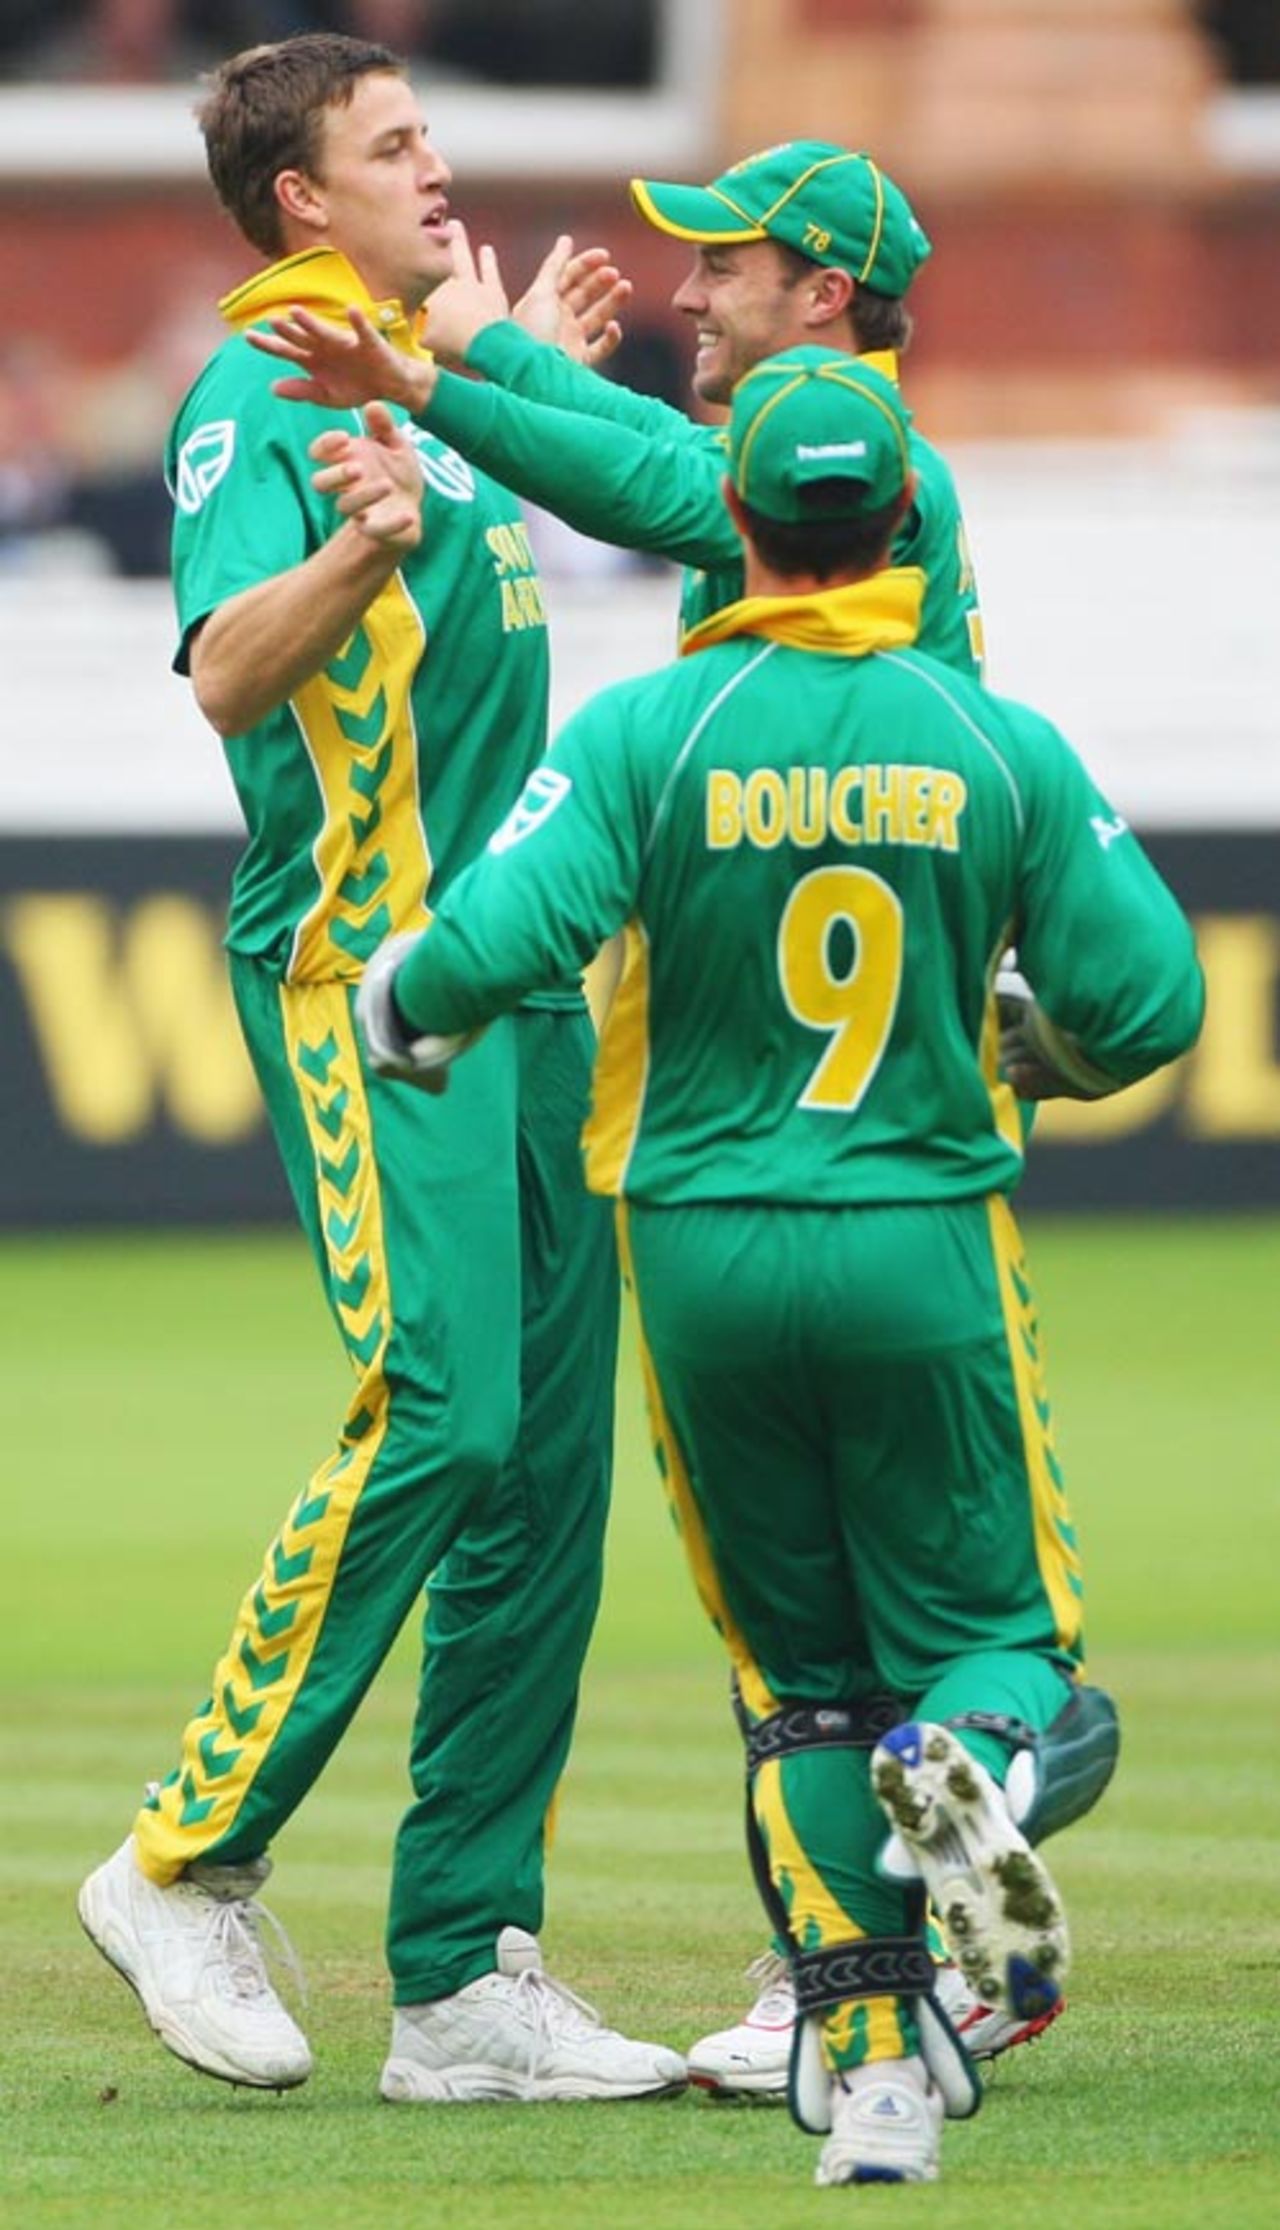 Mark Boucher celebrates Ian  Bell's wicket with Morne Morkel, England v South Africa, 4th ODI, Lord's, August 31, 2008